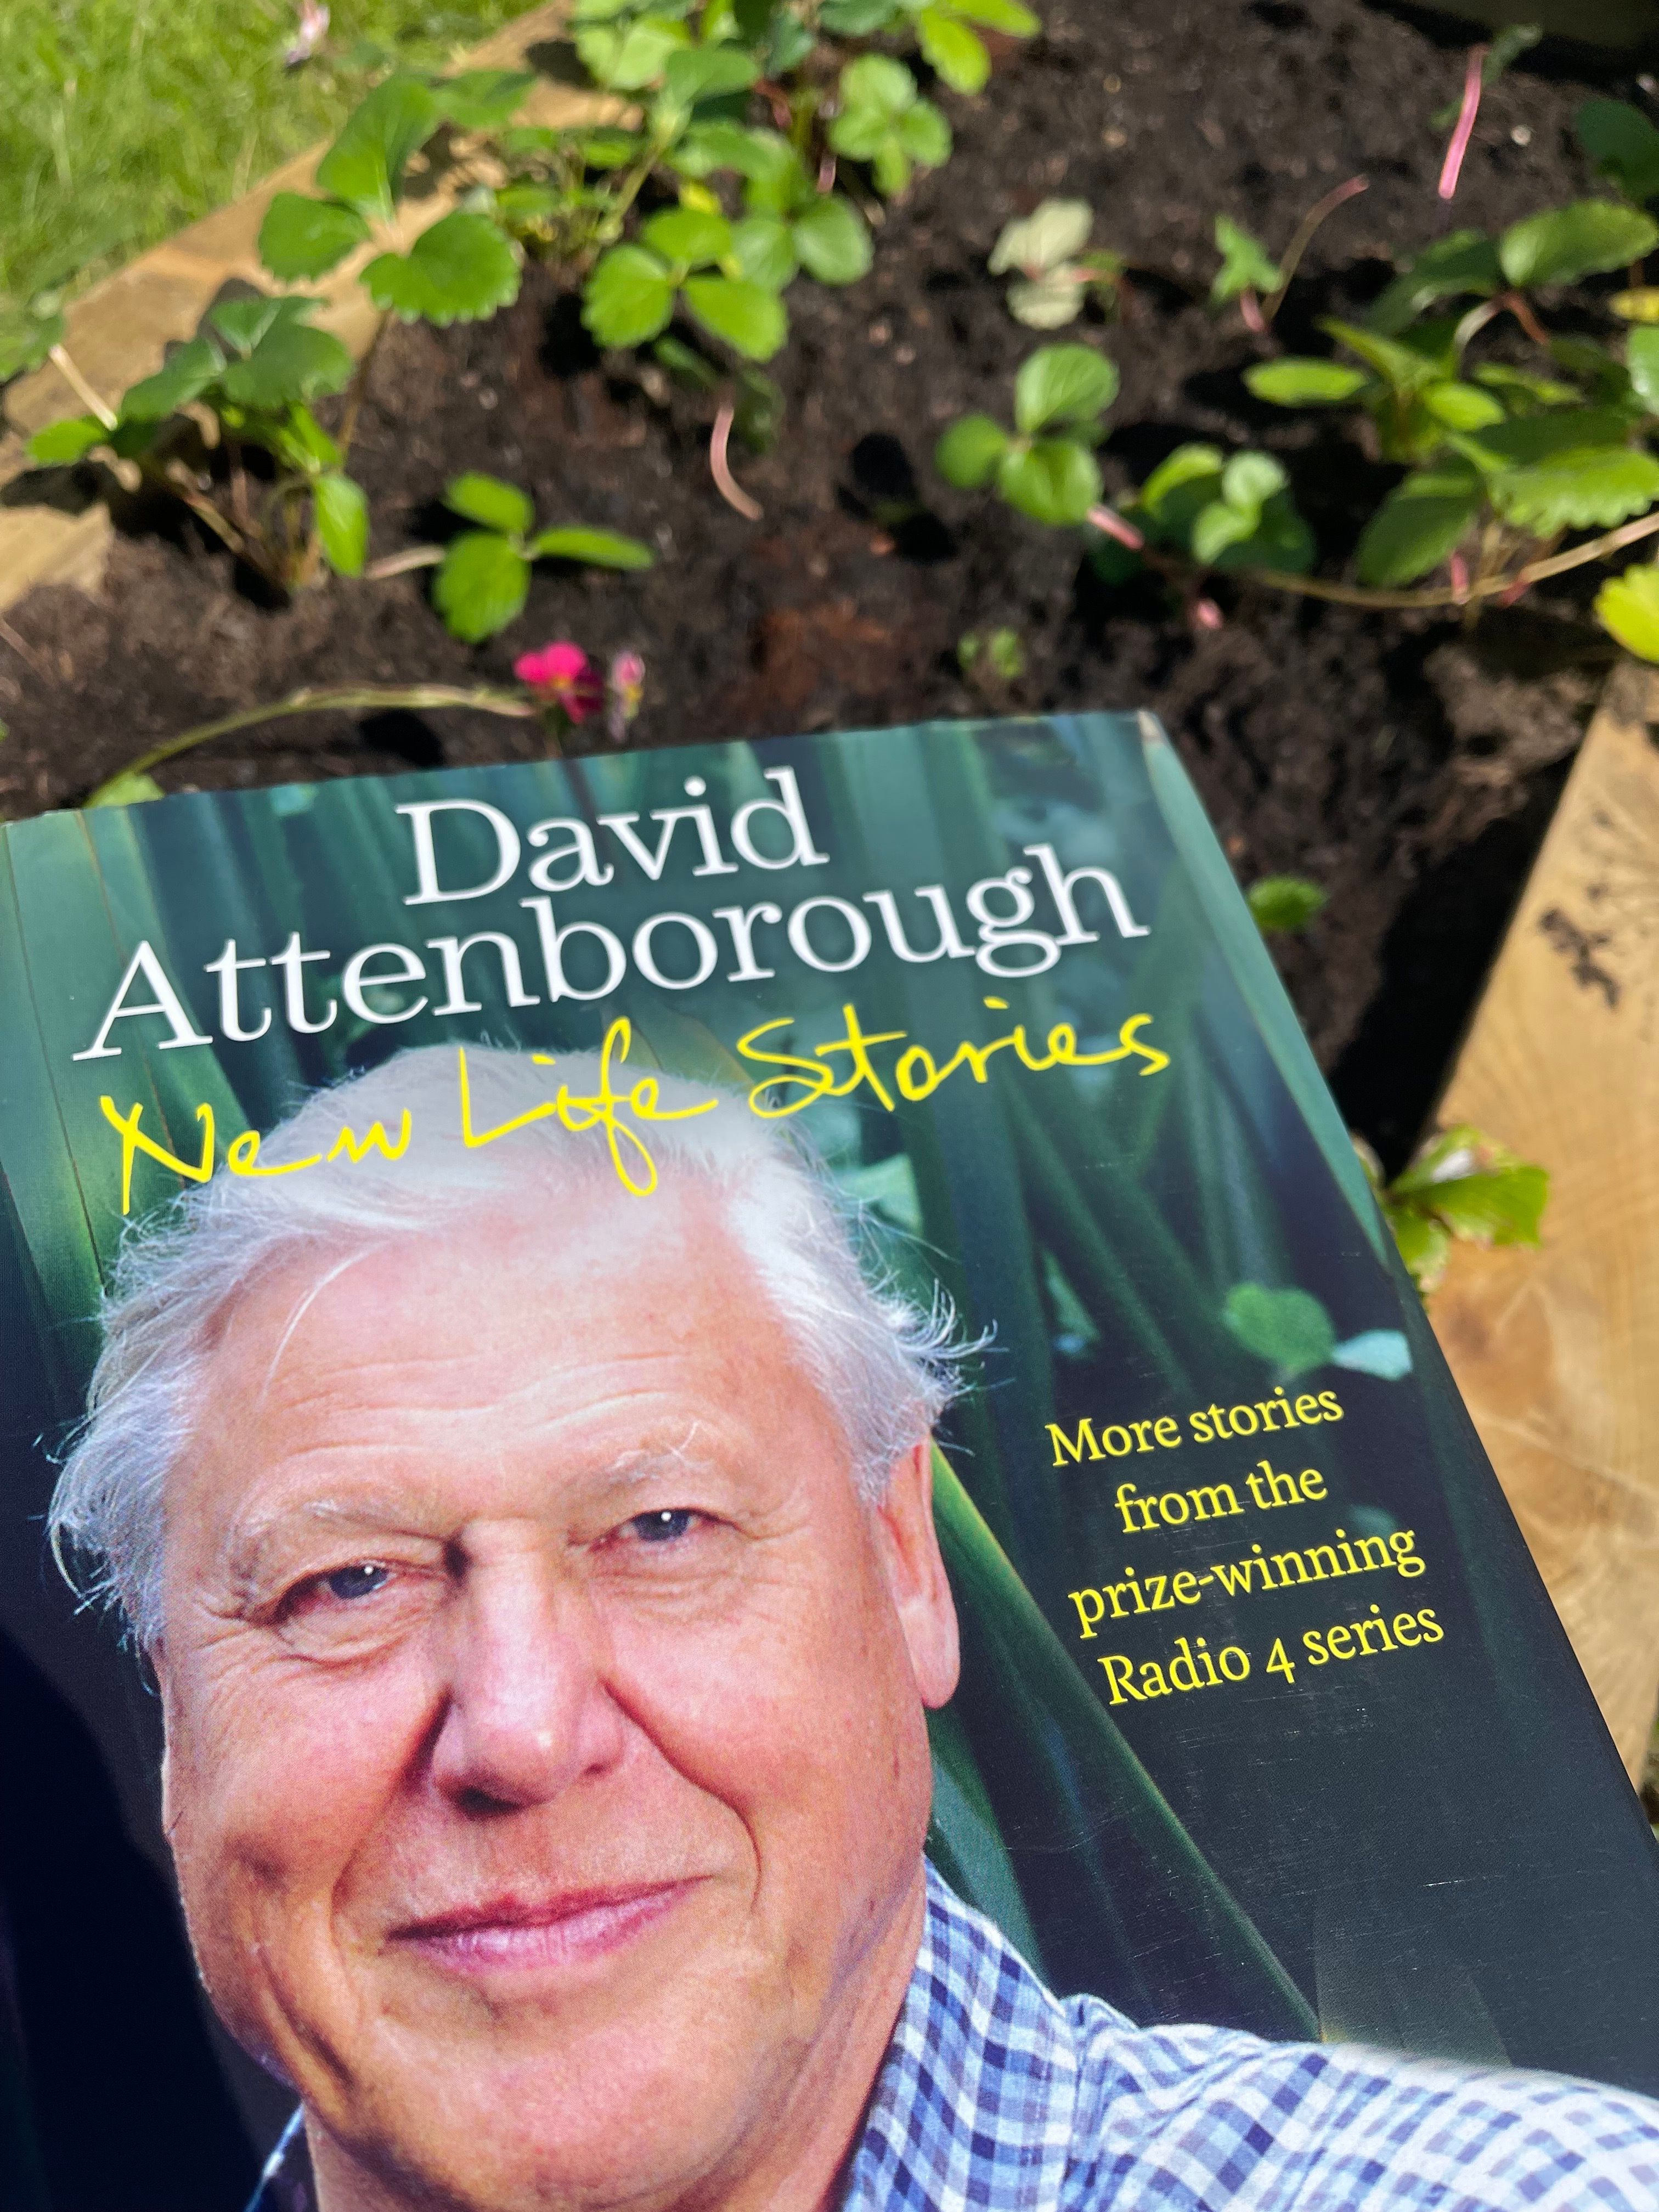 David Attenborough New Life Stories in holiday home garden